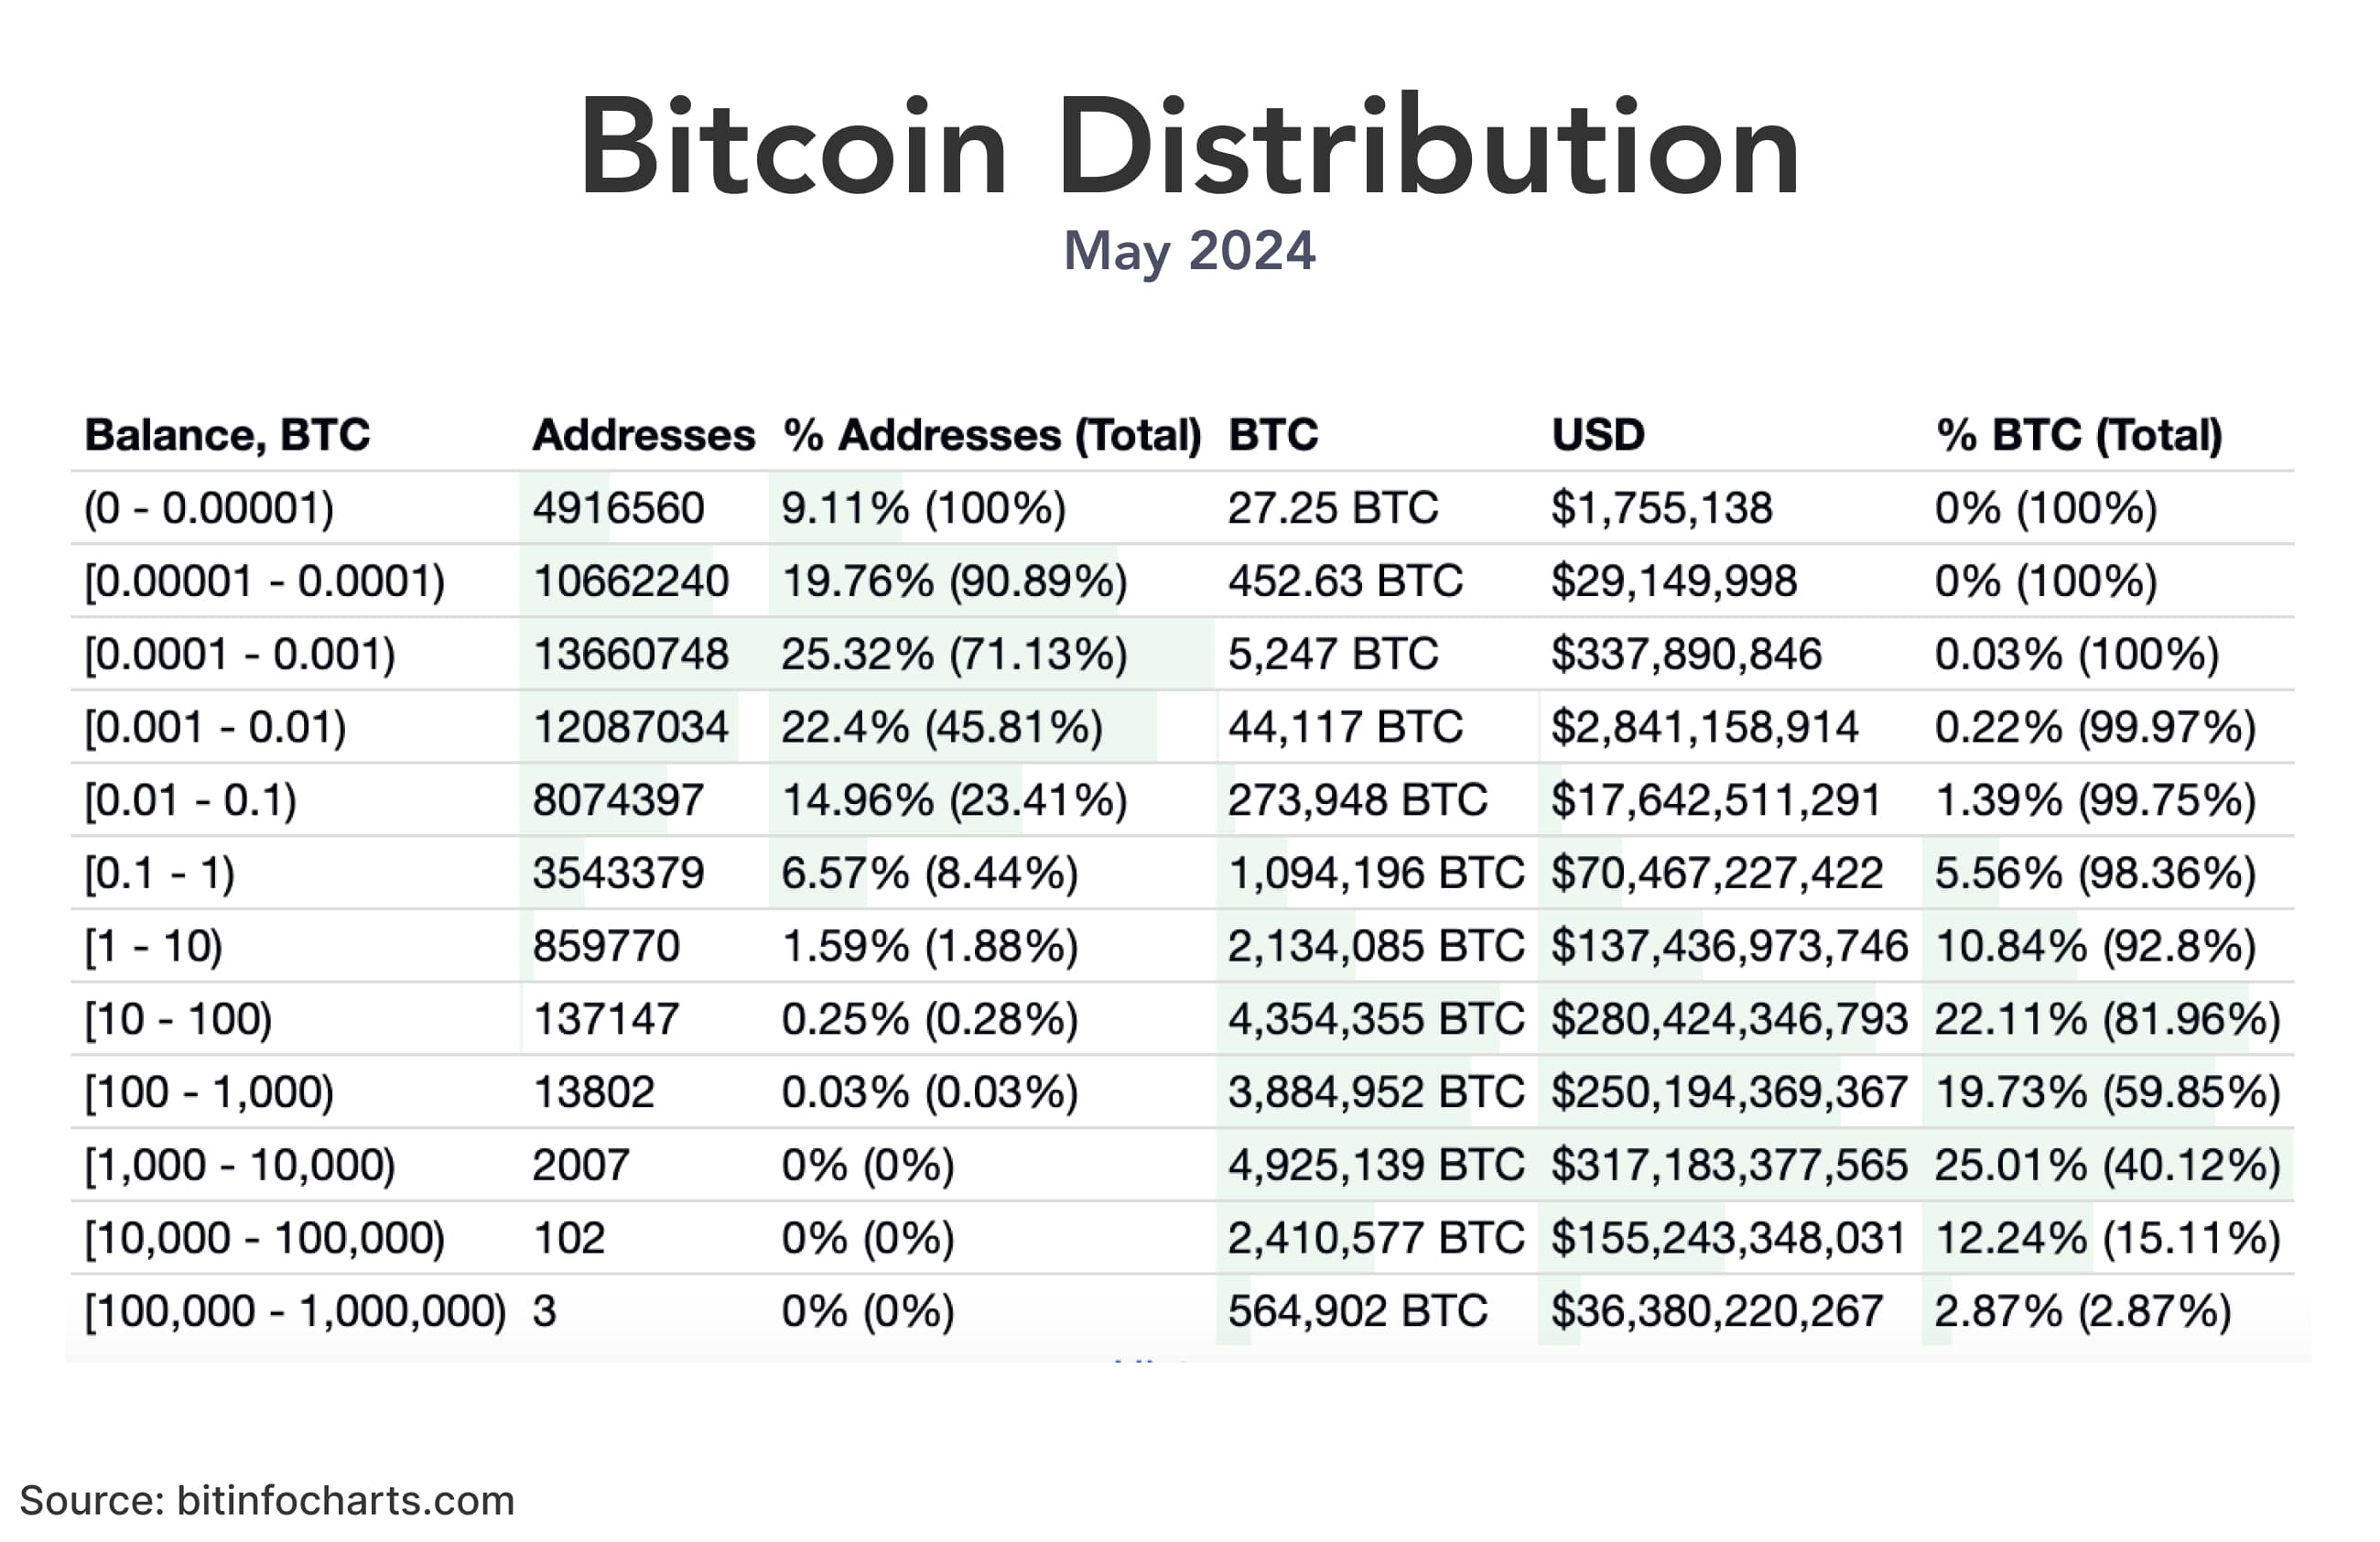 The image is a table showing Bitcoin distribution across various address balances. It lists the number of addresses, amount of Bitcoin, its value in USD, and percentage distribution for each balance range from less than 0.00001 BTC to over 100,000 BTC